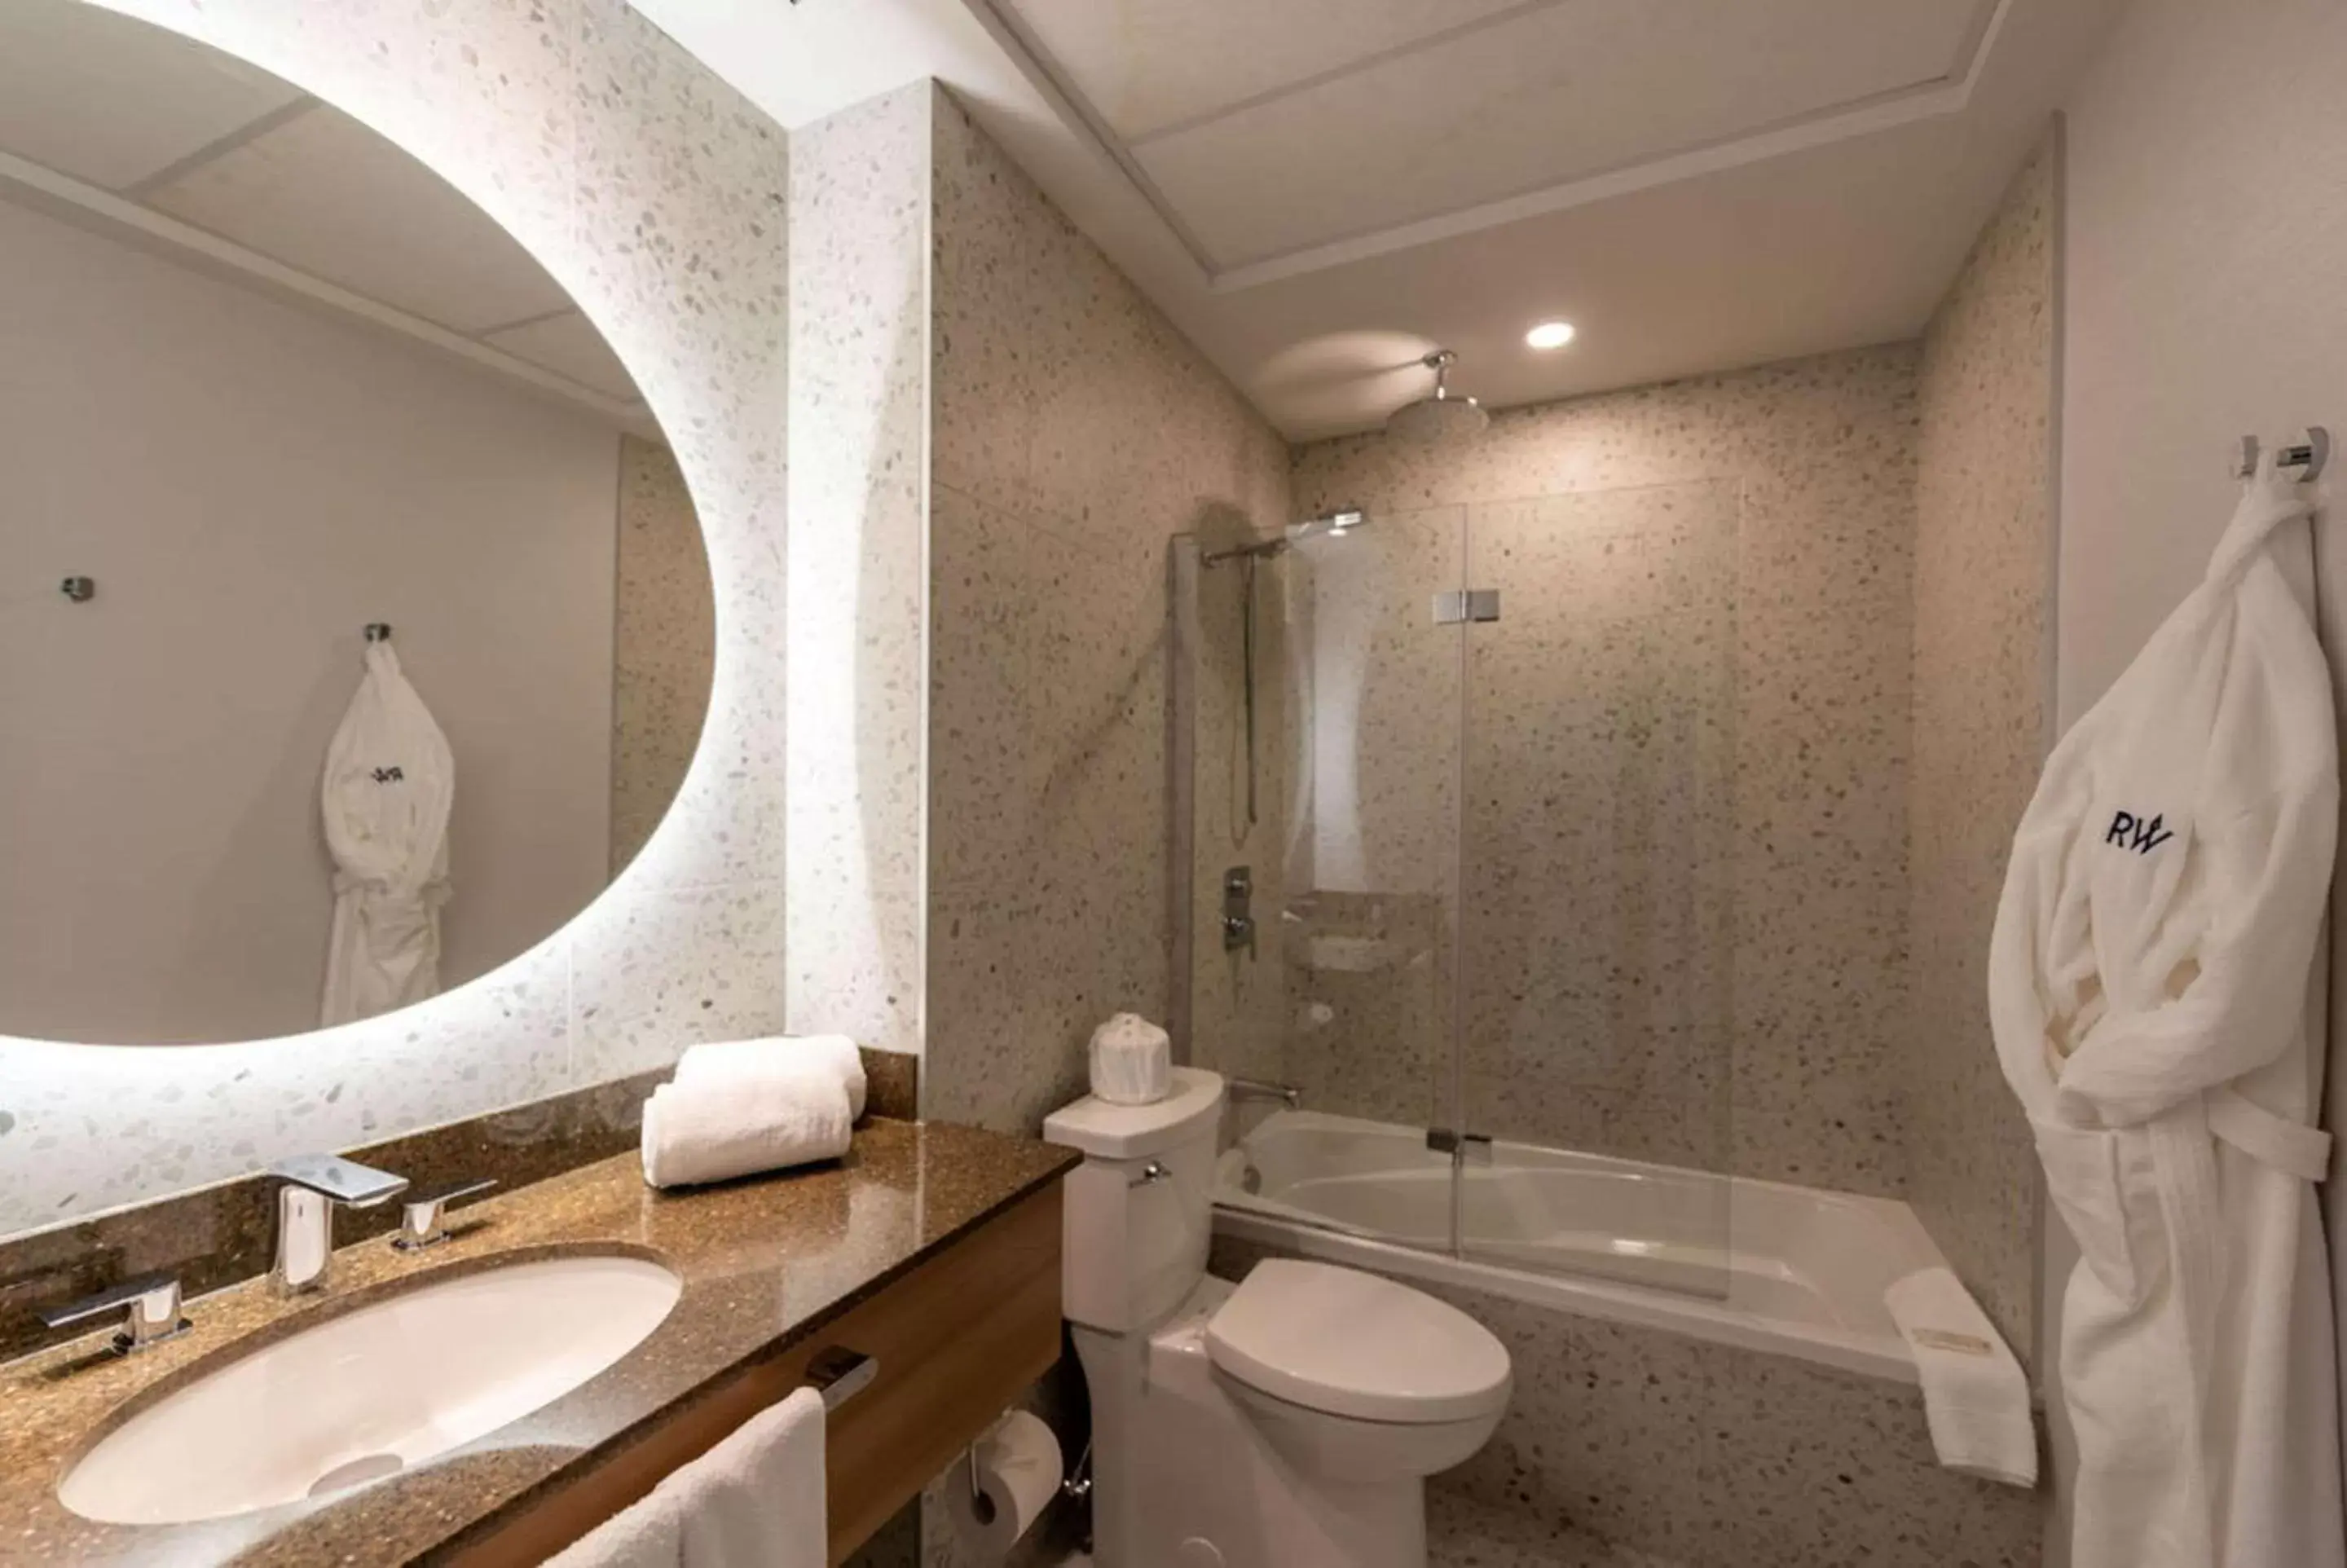 Bathroom in Hotel Royal William, Ascend Hotel Collection